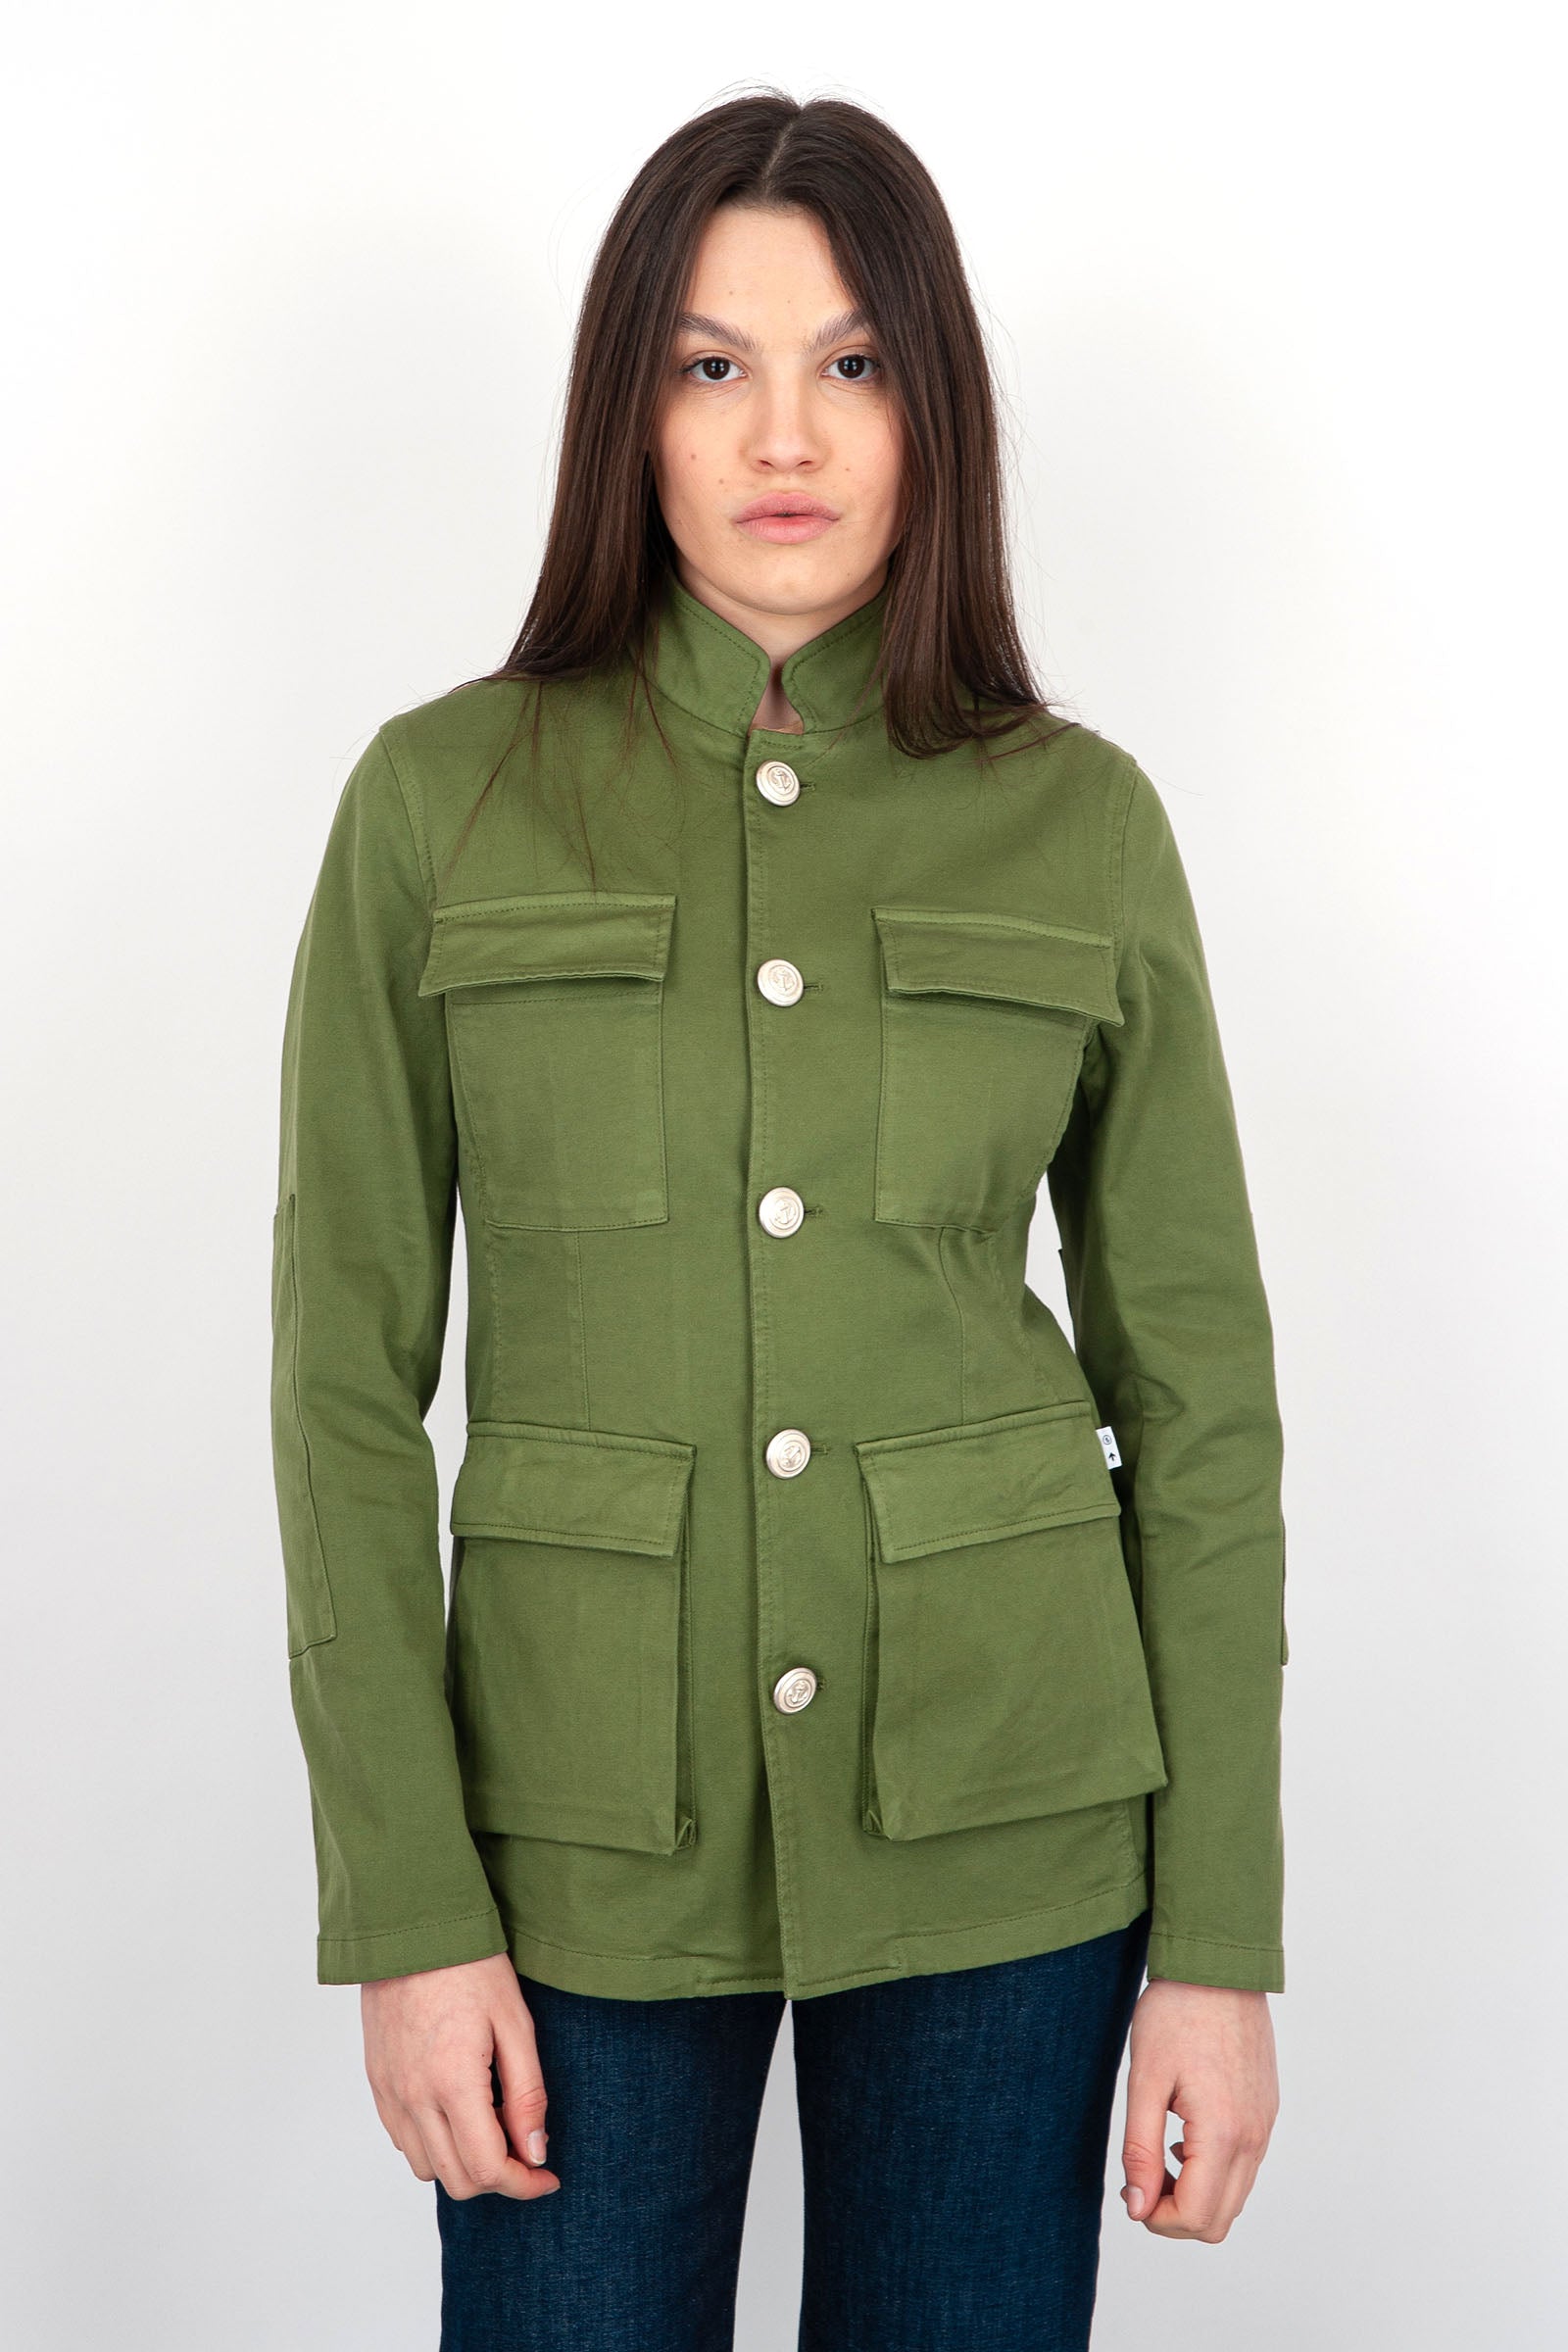 Department Five Green Military Cotton Field Jacket - 1